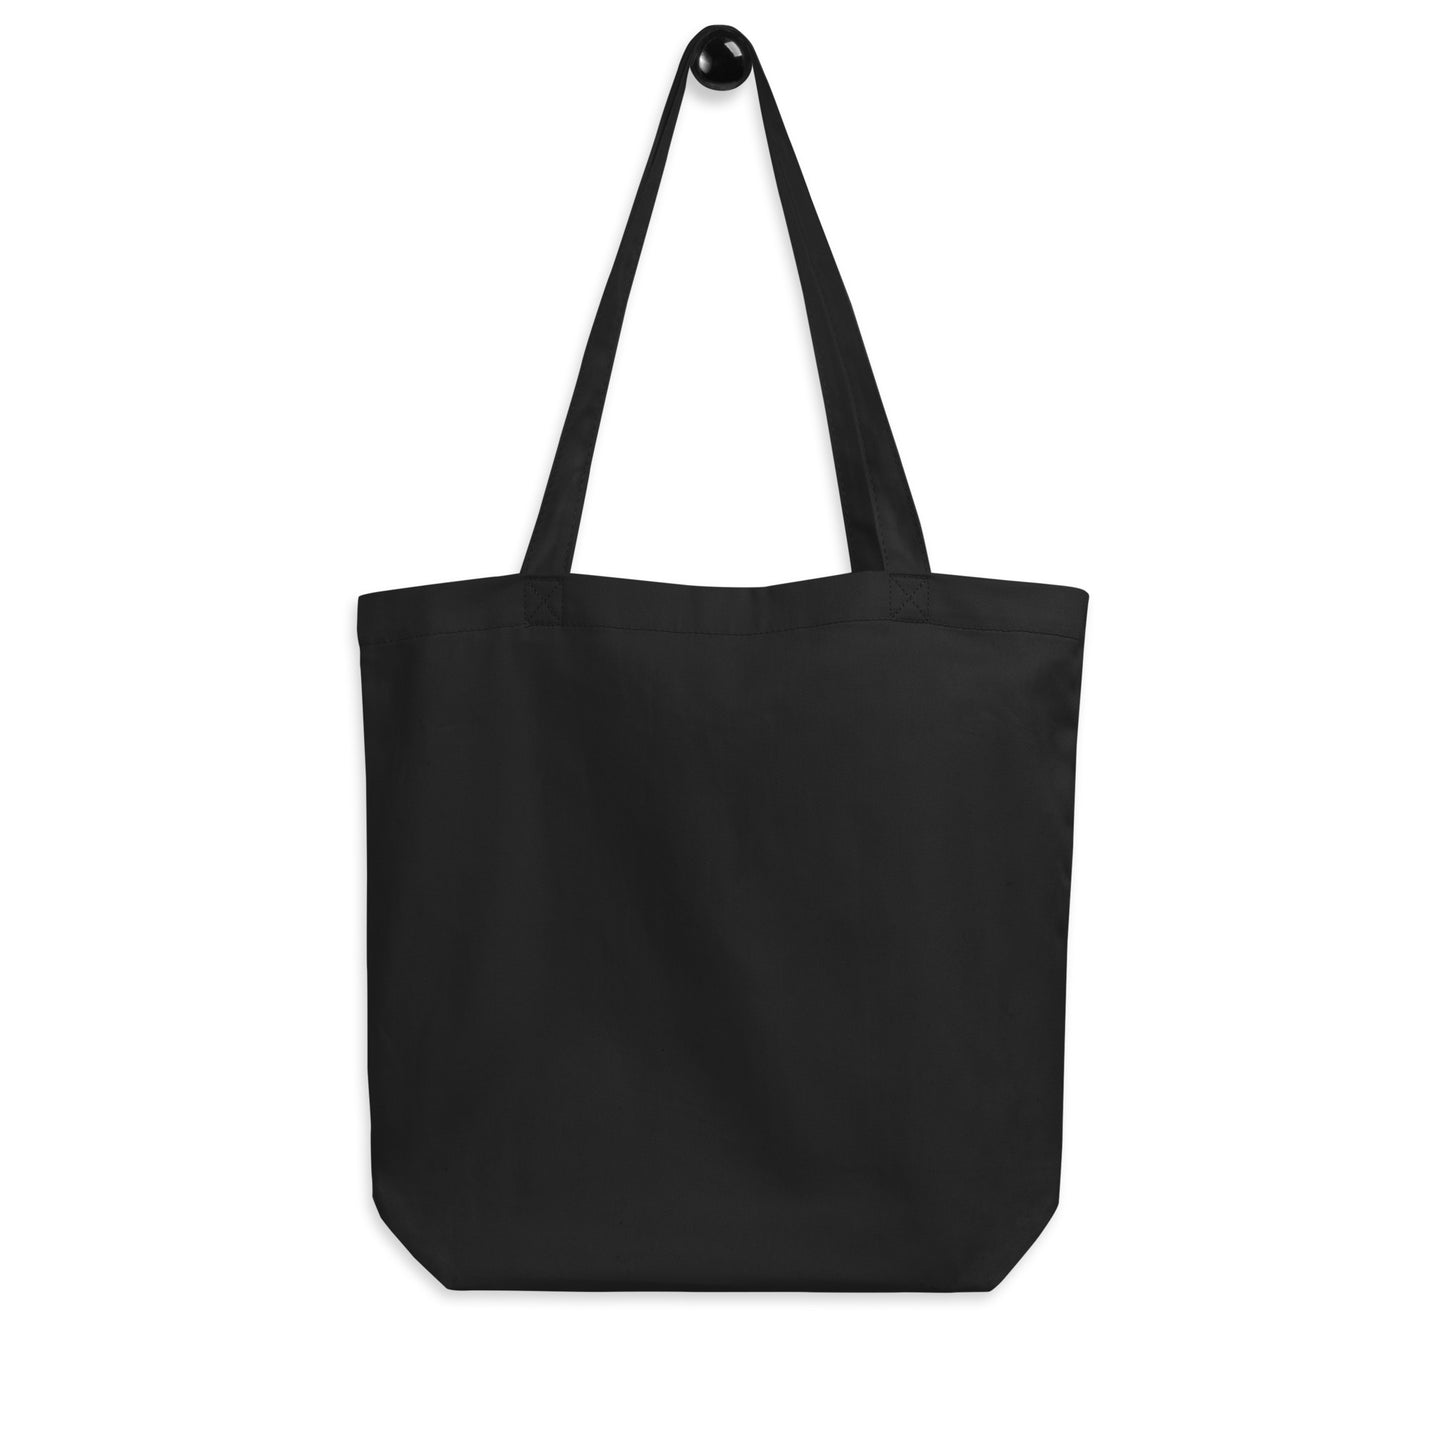 Unique Travel Gift Organic Tote - White Oval • SIN Singapore • YHM Designs - Image 05